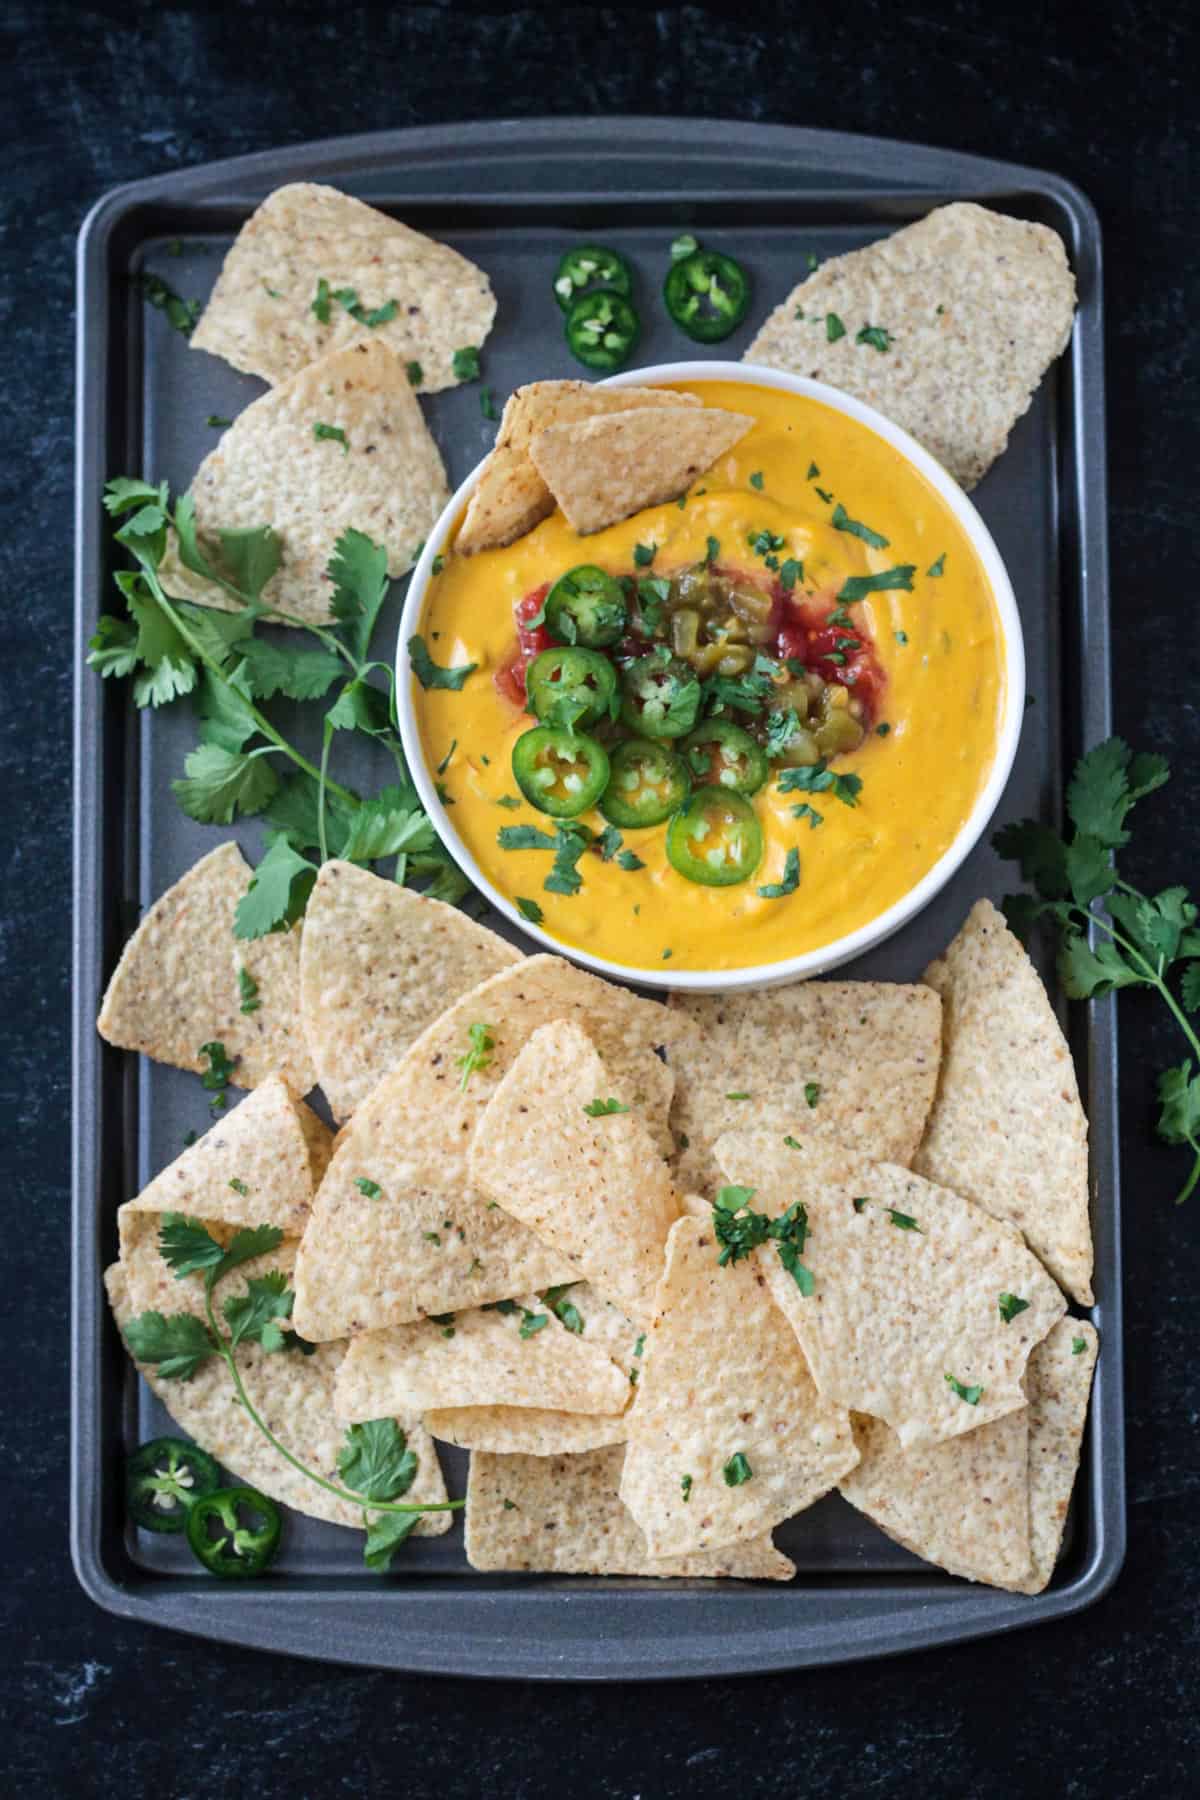 Bowl of cashew queso on a tray surrouned by tortillas chips.